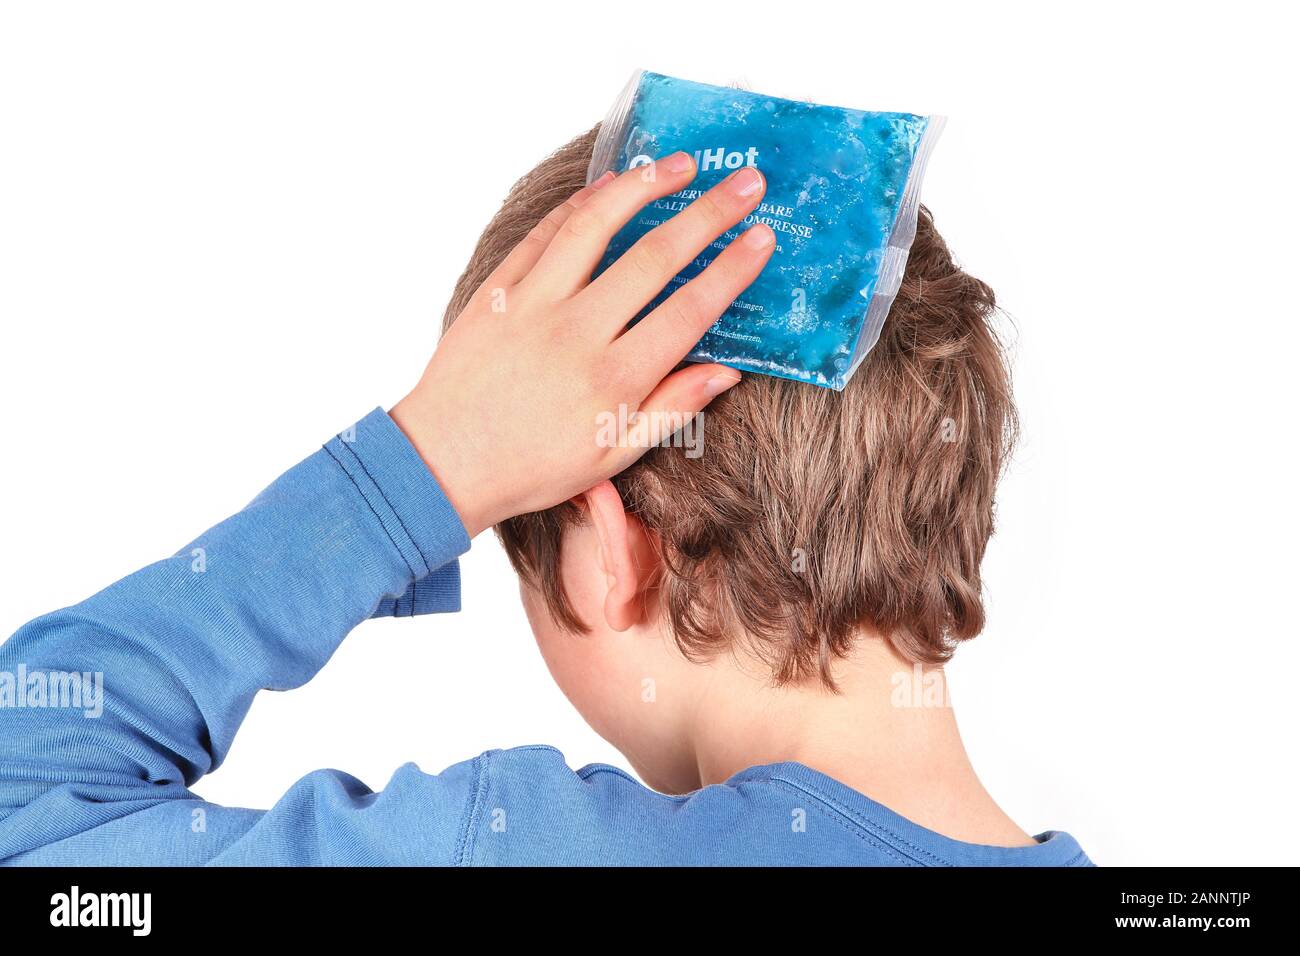 Cooling with ice pack, keep a Cool Head Stock Photo - Alamy